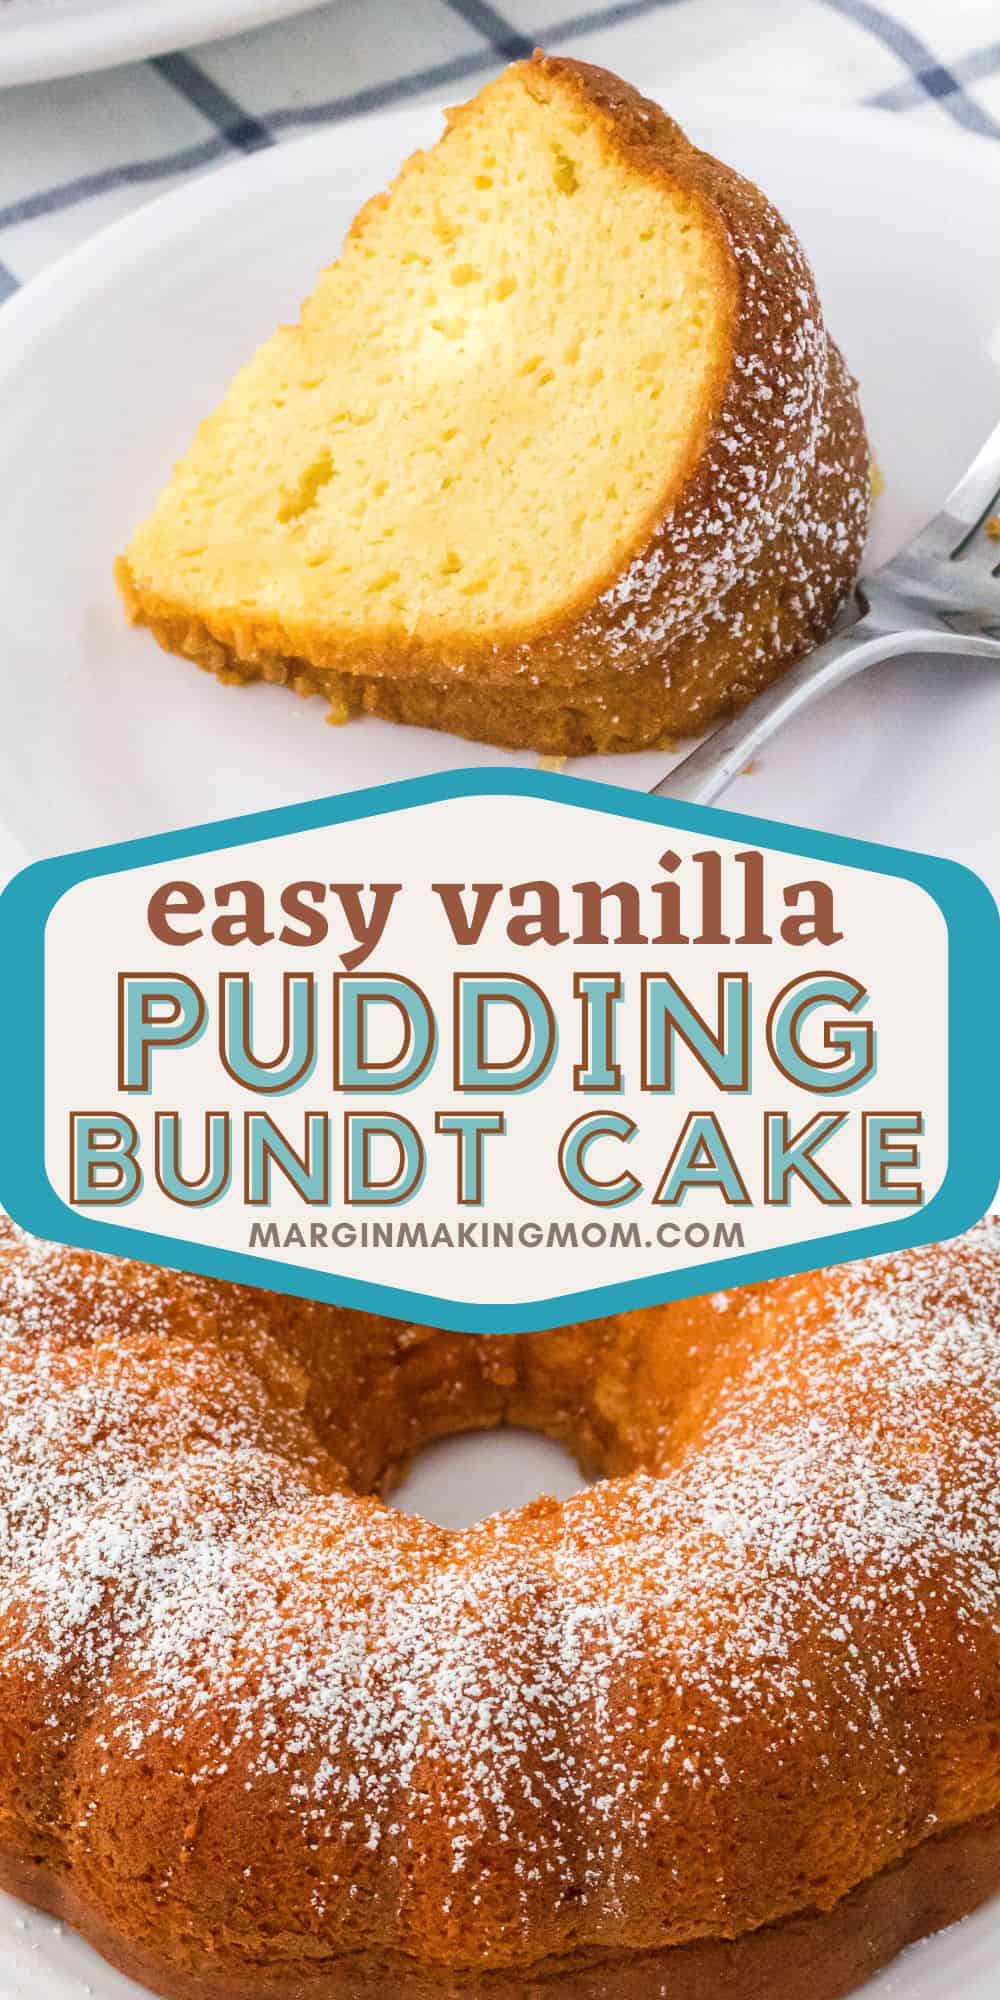 two photos; one shows a slice of vanilla pudding cake served on a white plate, the other shows the whole bundt cake dusted with powdered sugar